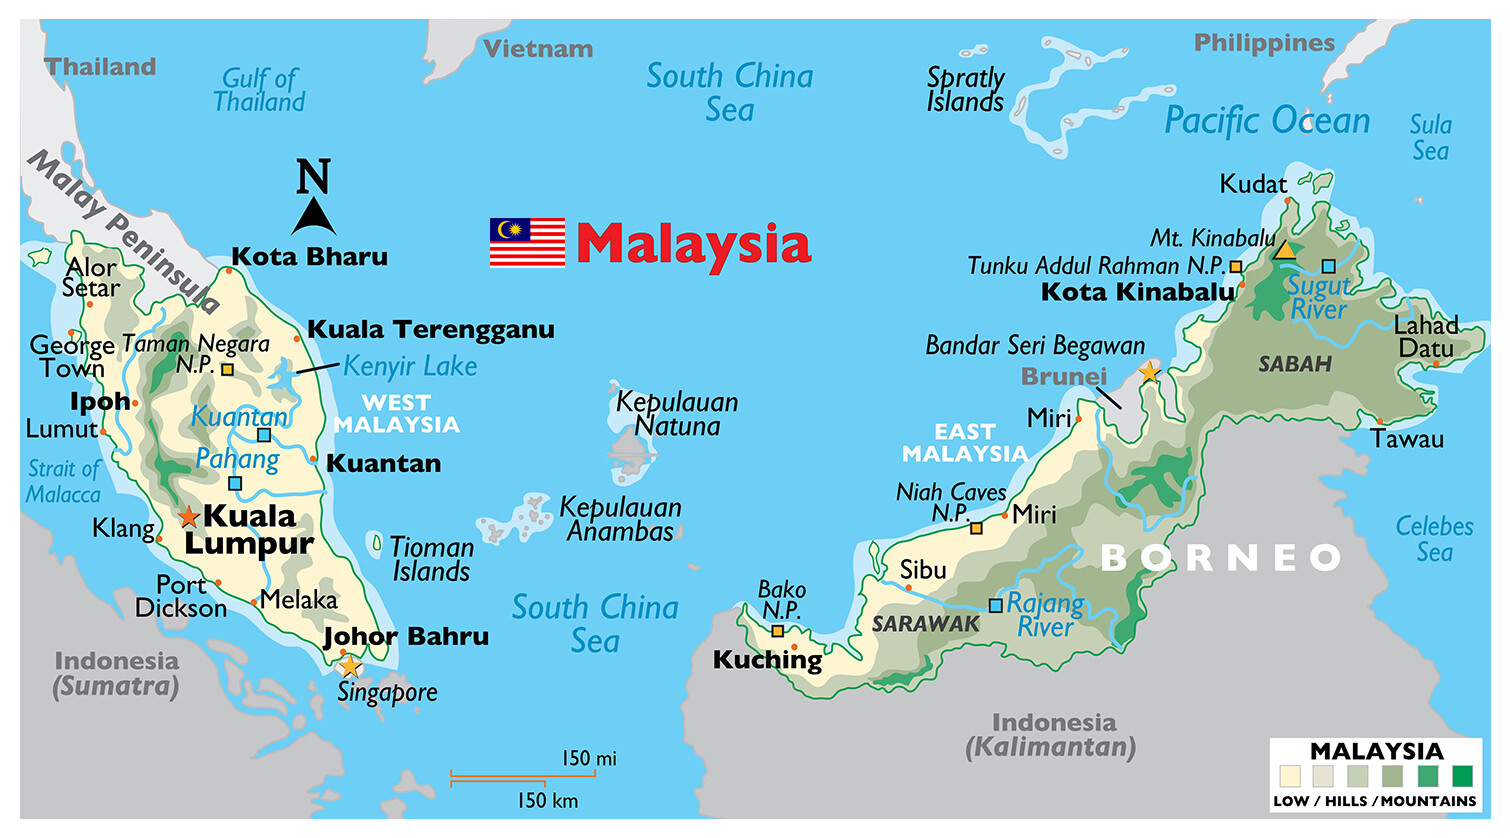 WEST & EAST MALAYSIA MAP